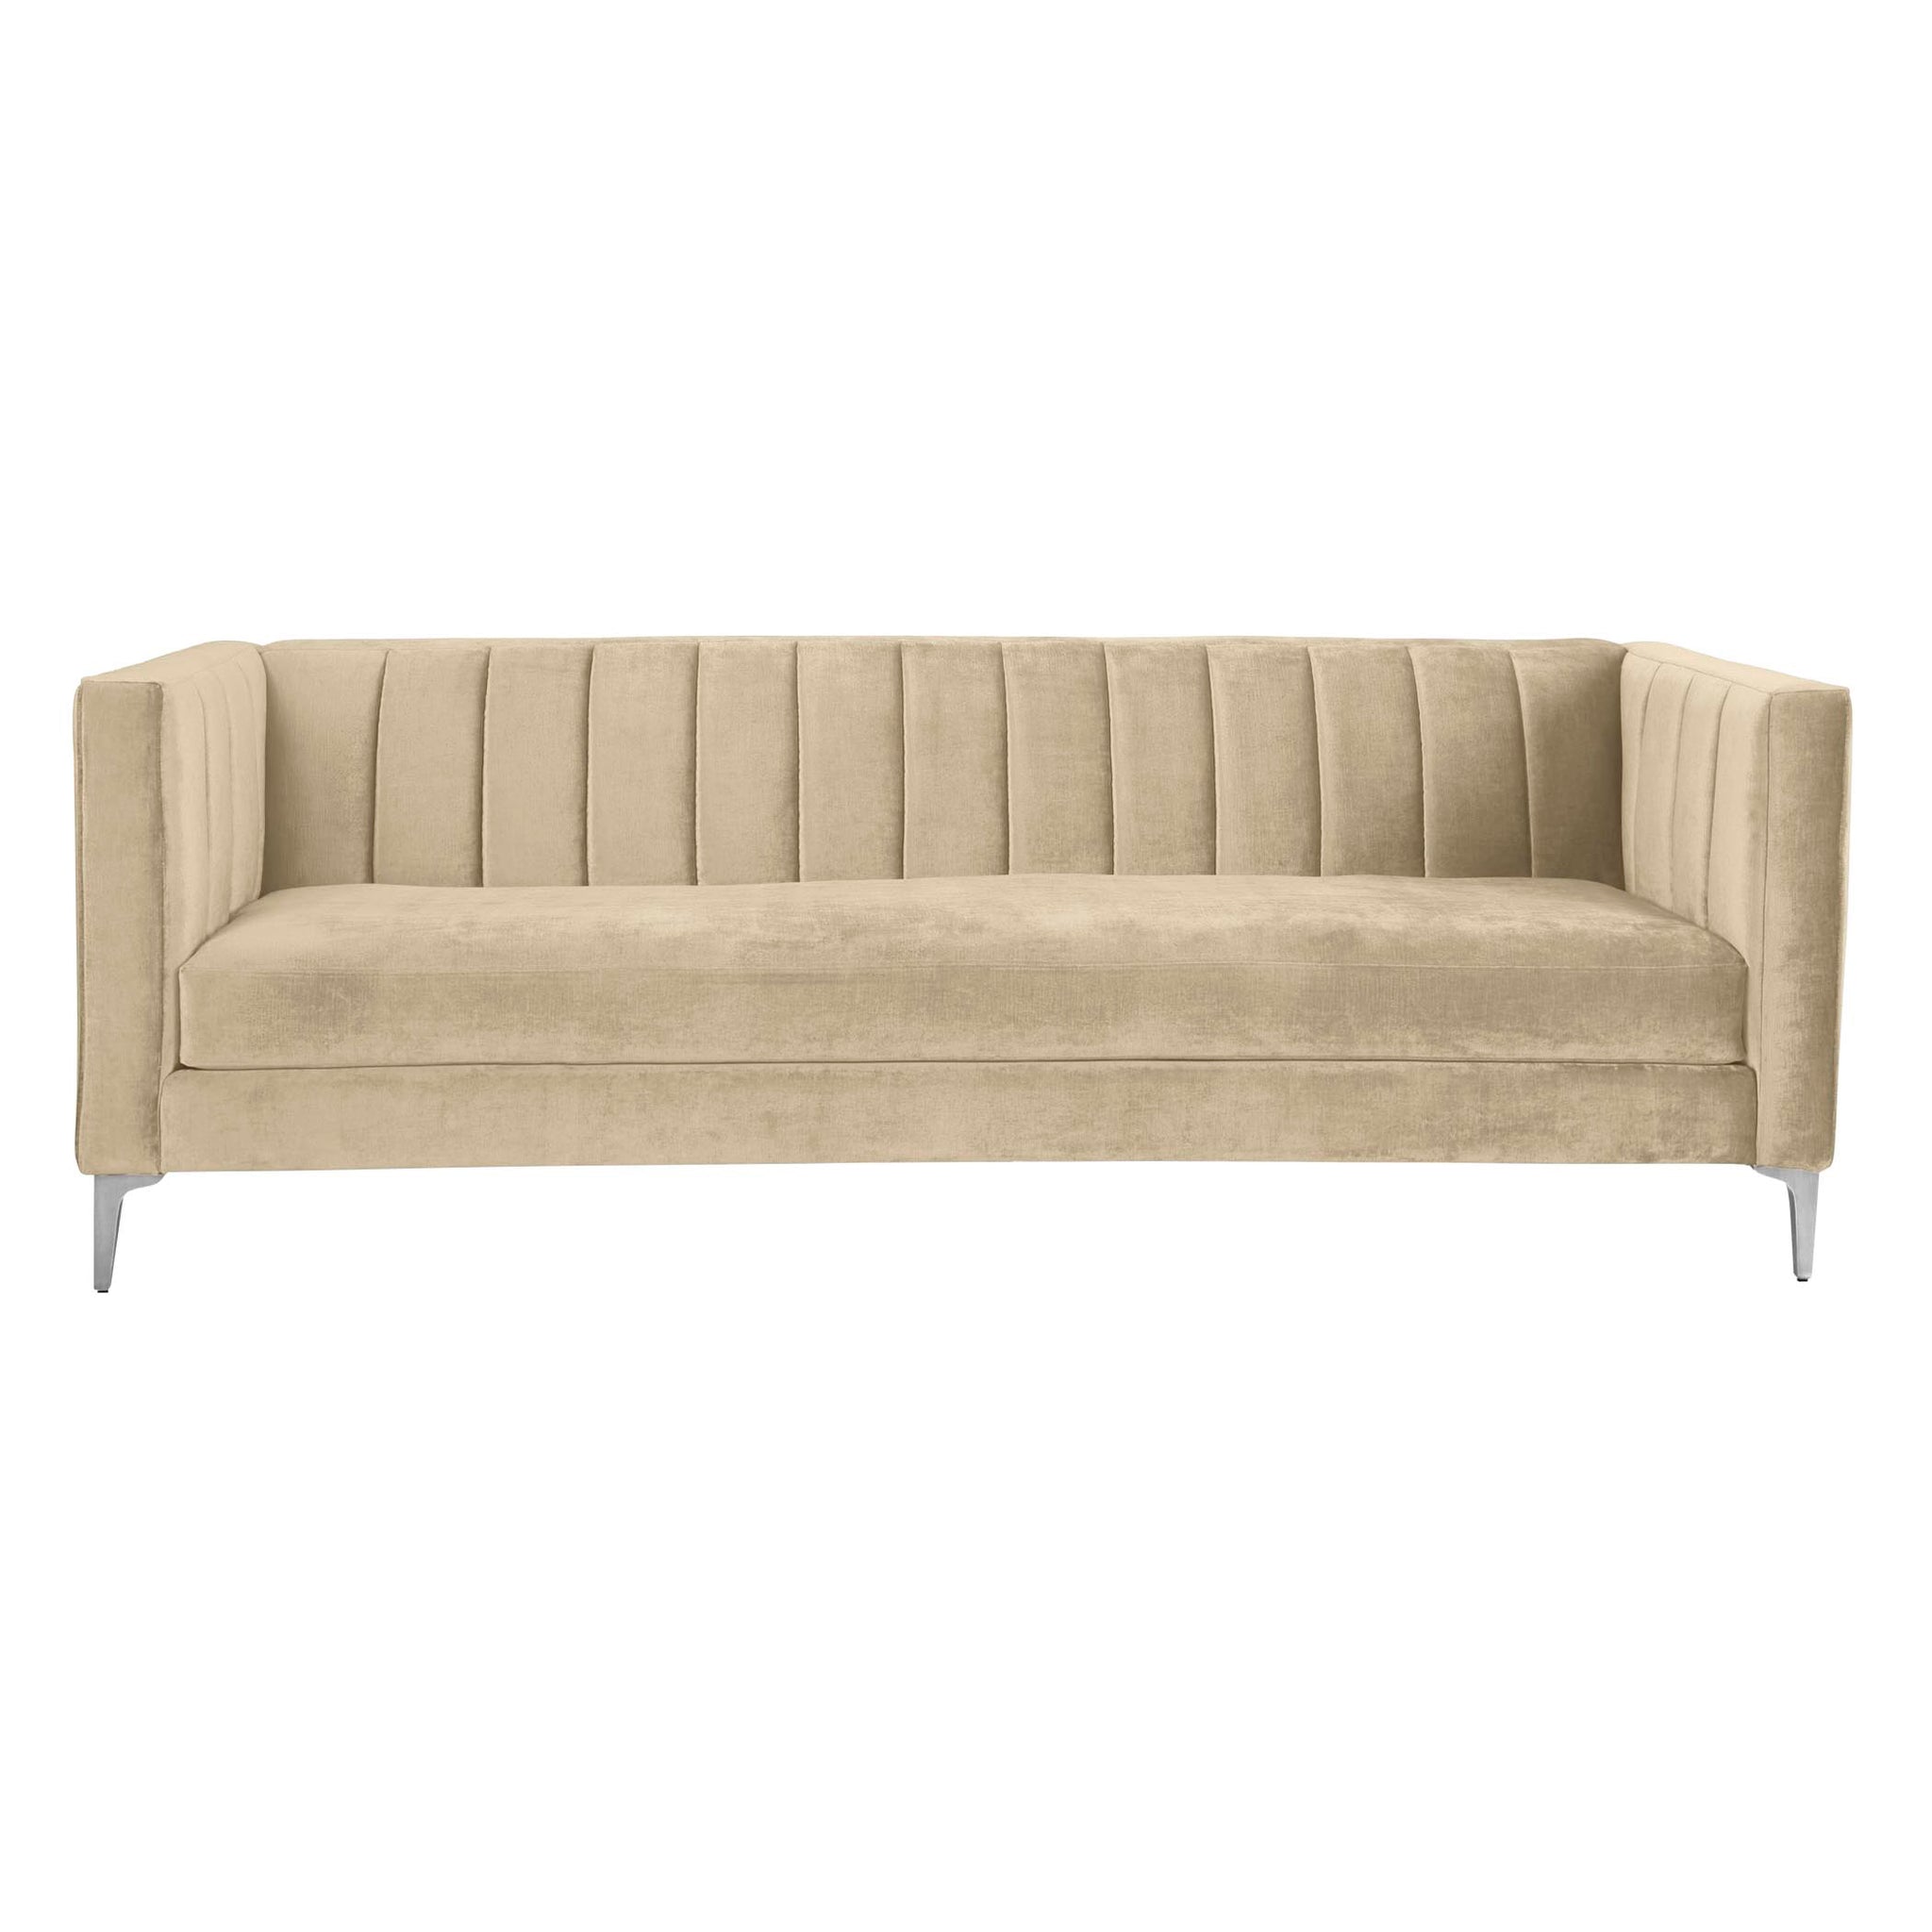 cream-couch-3-divisional-velvet-with-silver-legs-modern-pleated-back-5-star-furniture